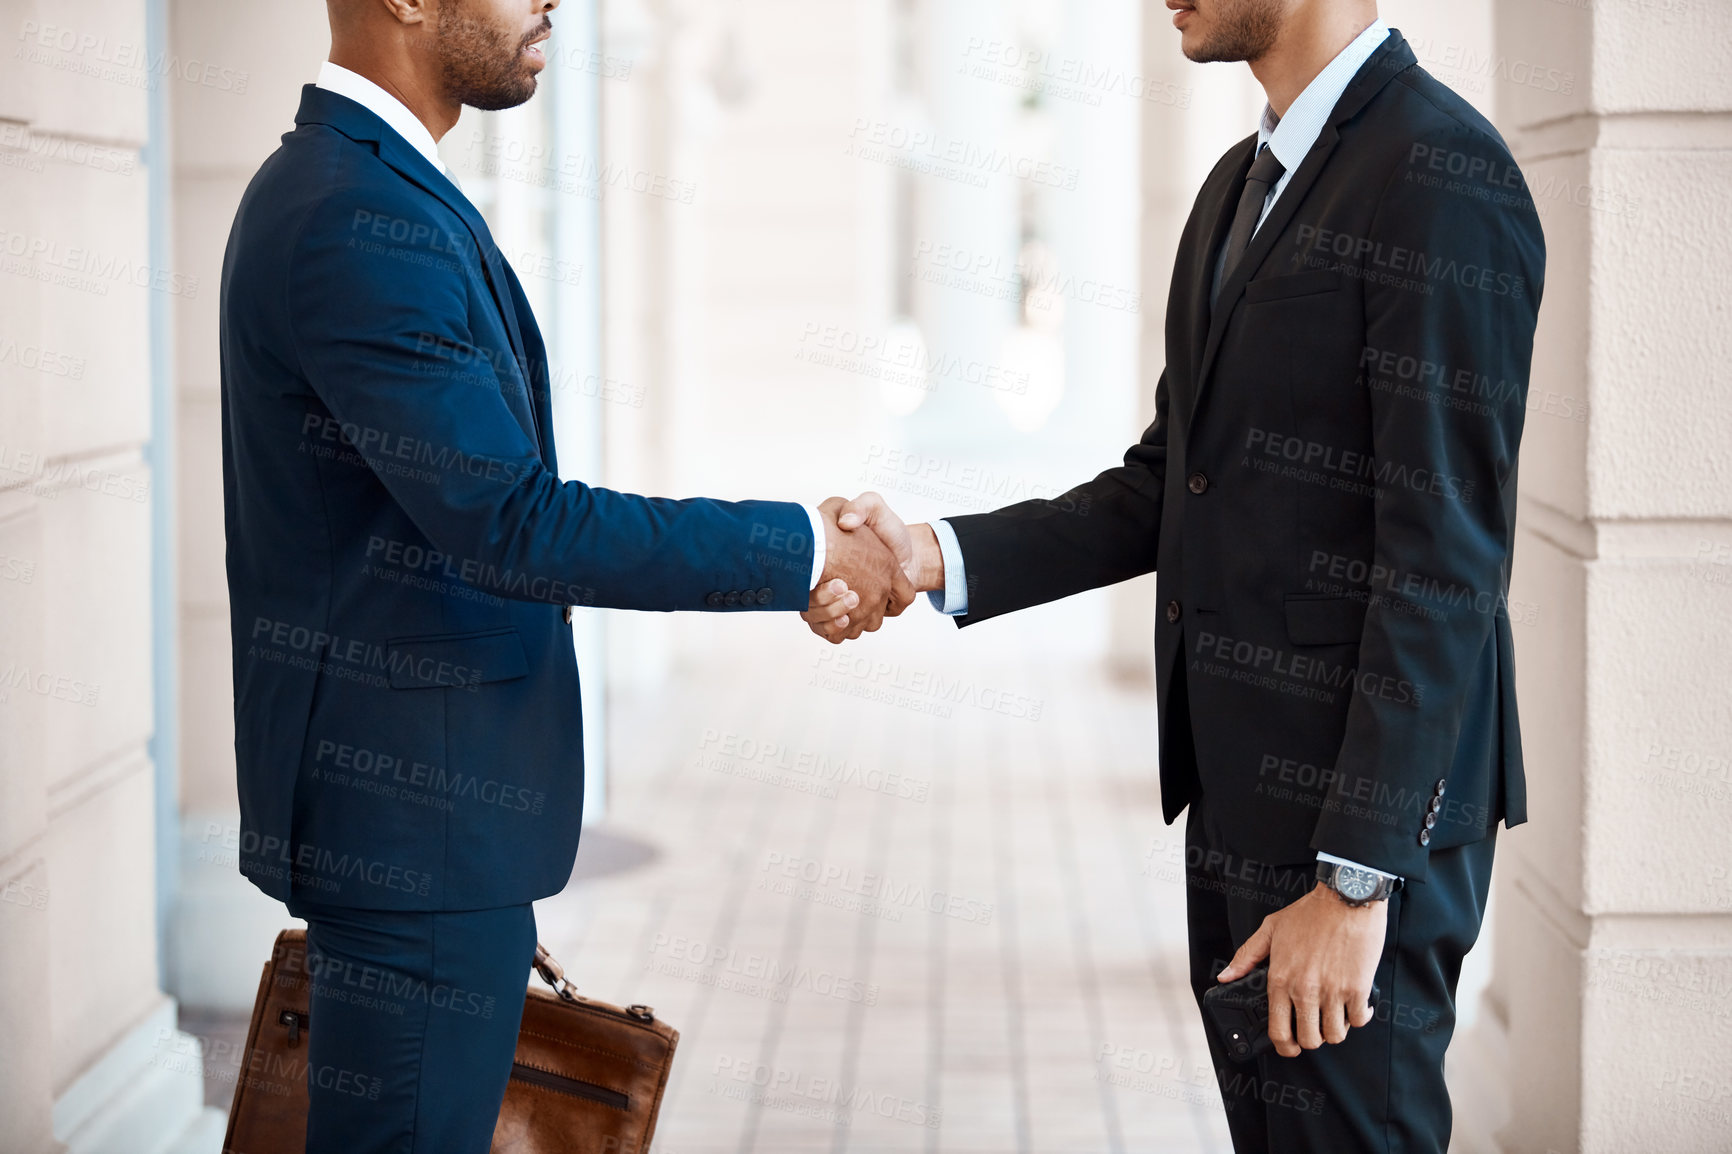 Buy stock photo Cropped shot of unrecognizable businessmen shaking hands outside